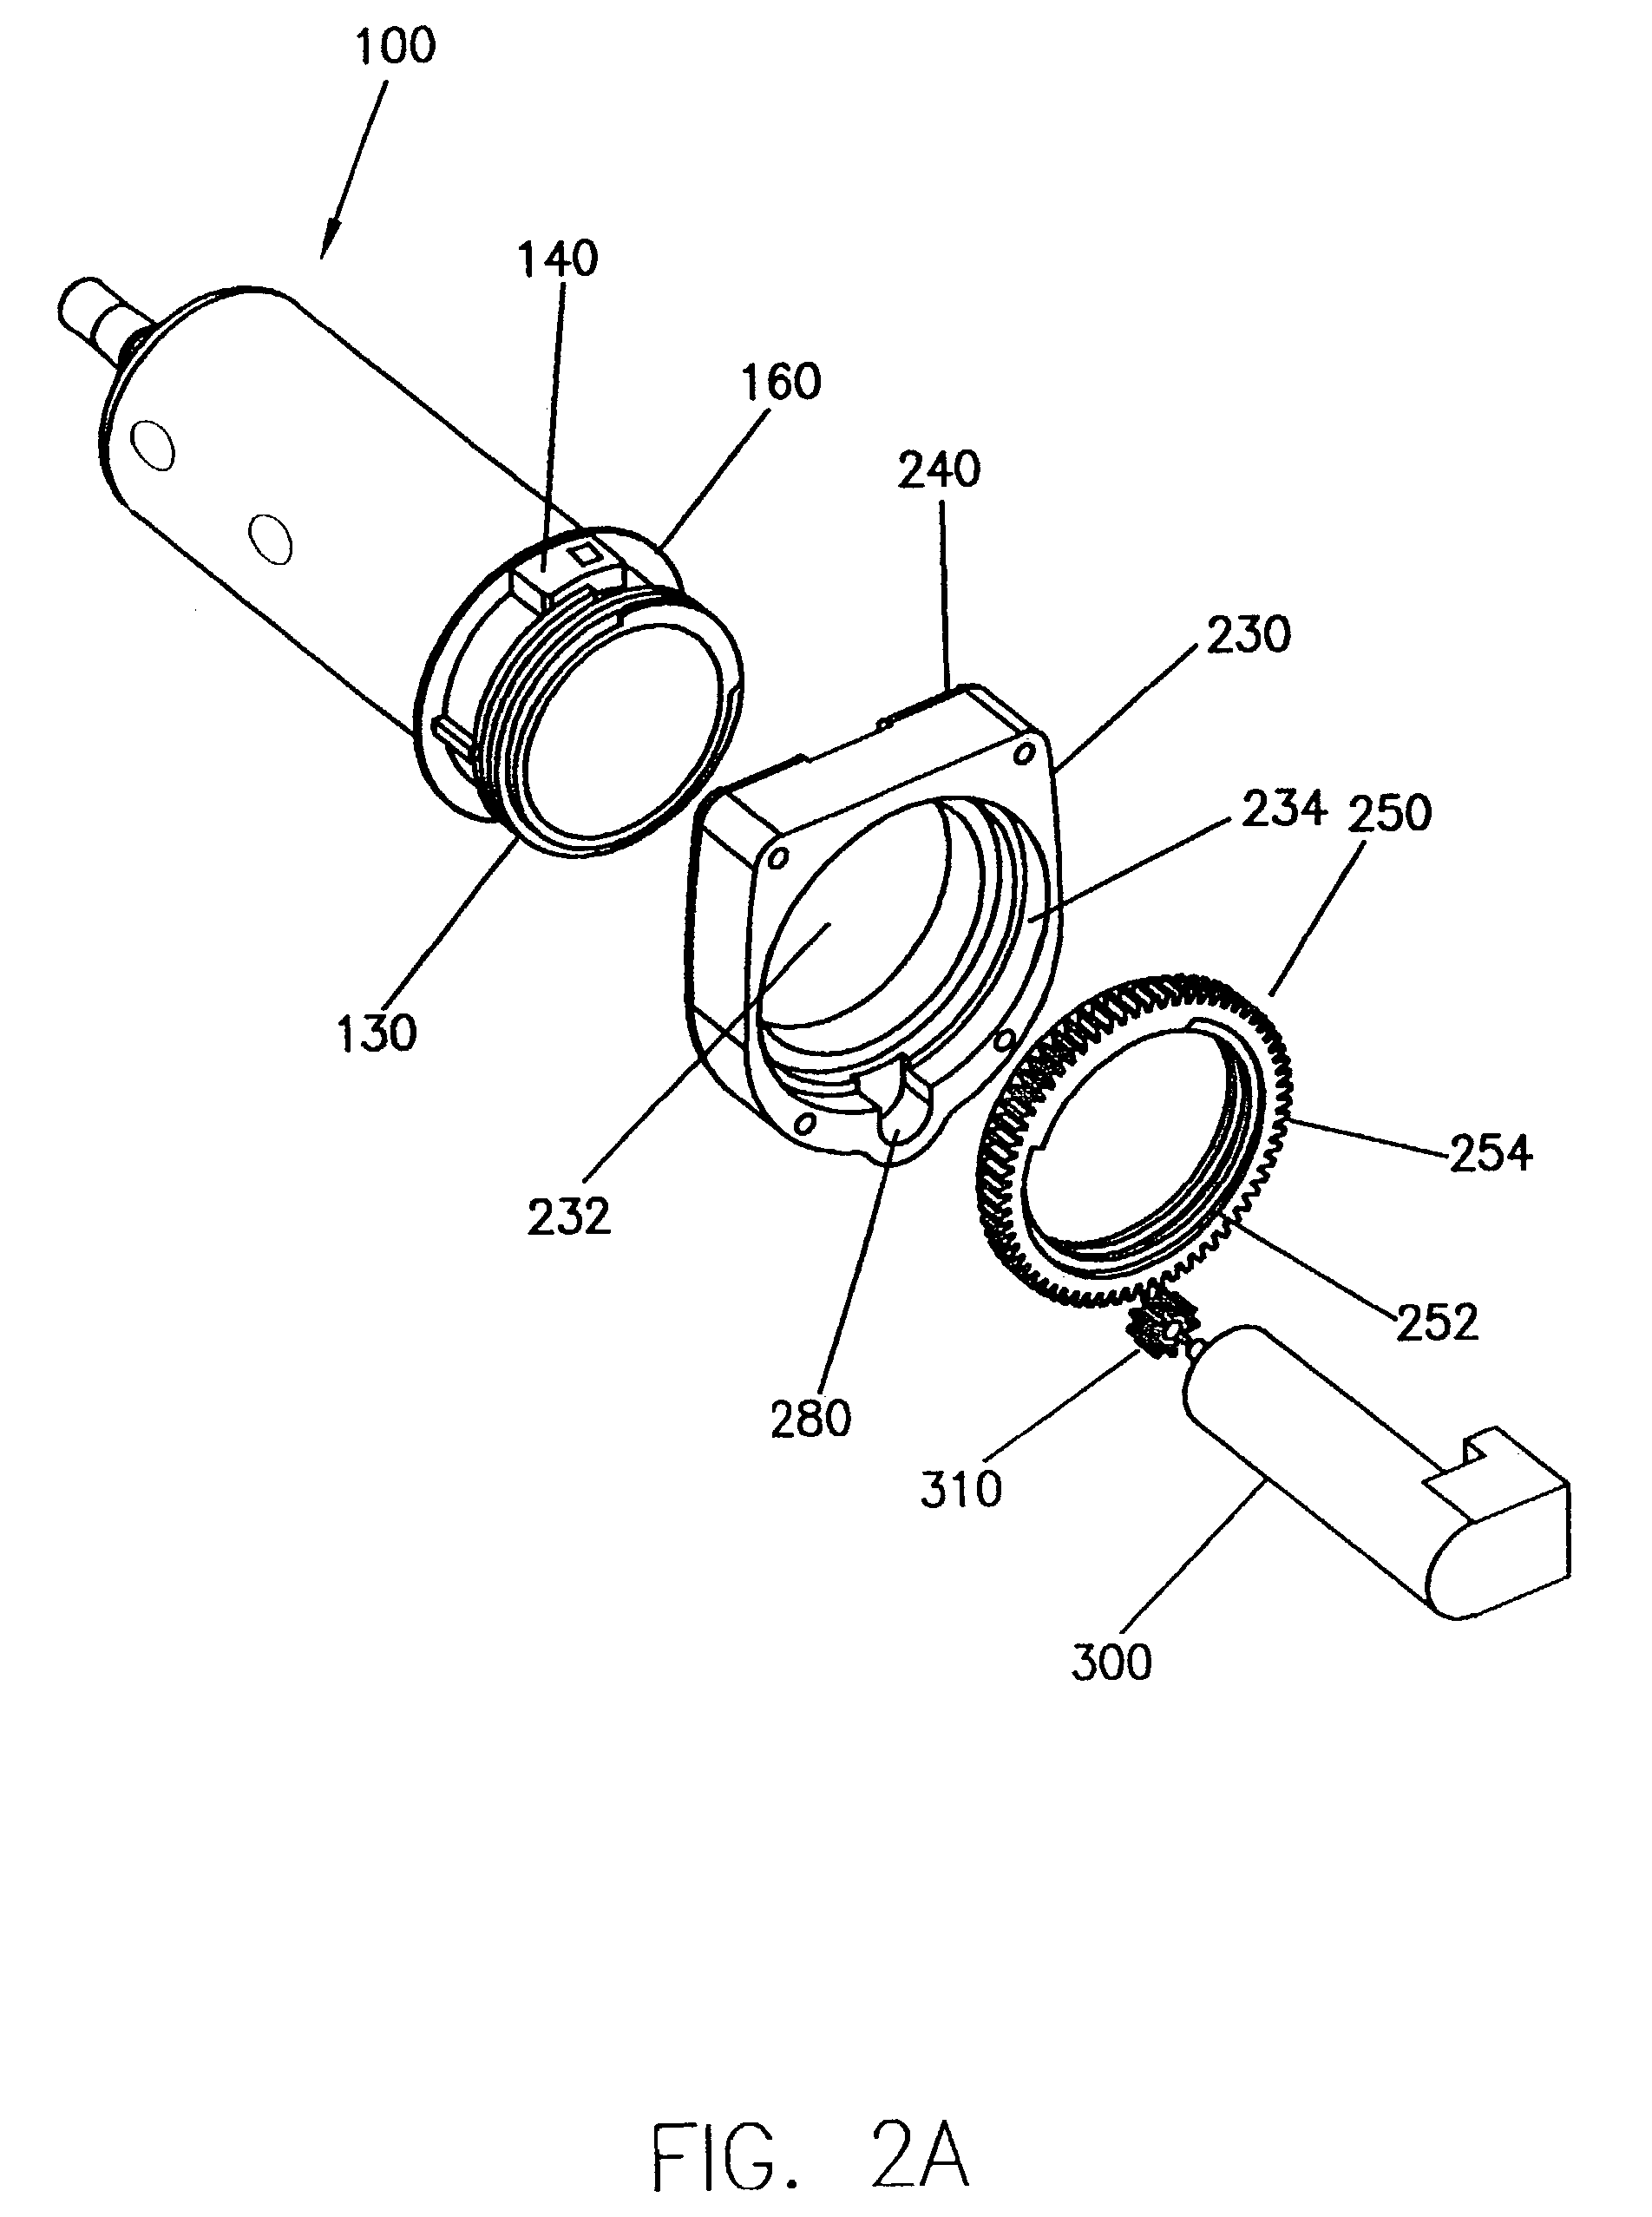 Injector system including an injector drive member that automatically advances and engages a syringe plunger